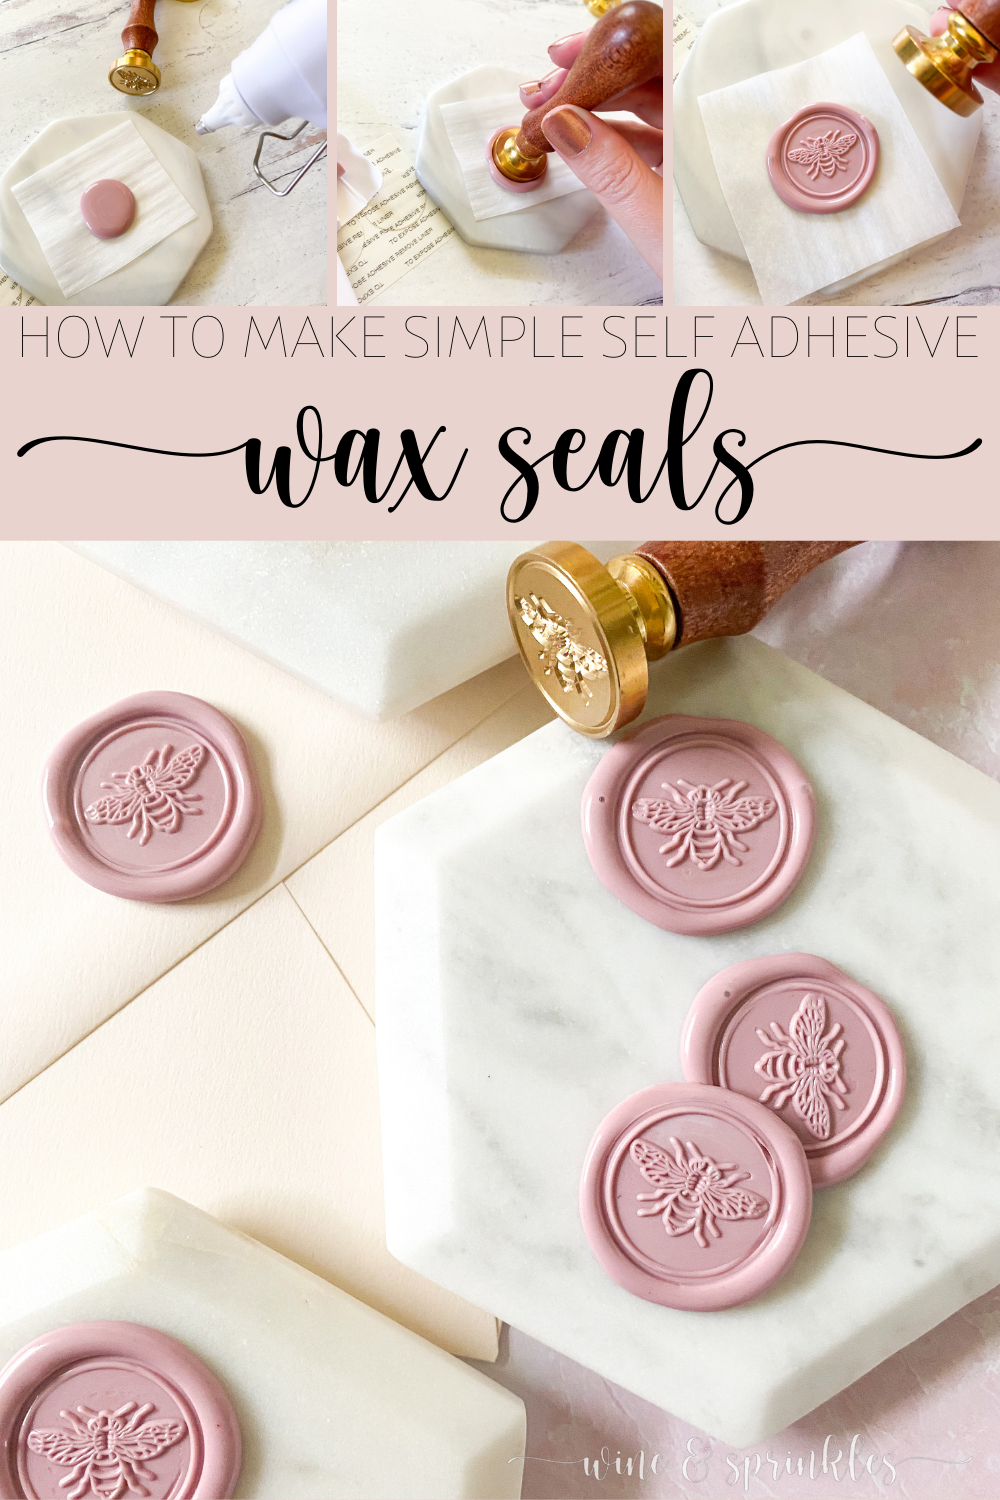 Scripted Messages Premade Self Adhesive Wax Seal 